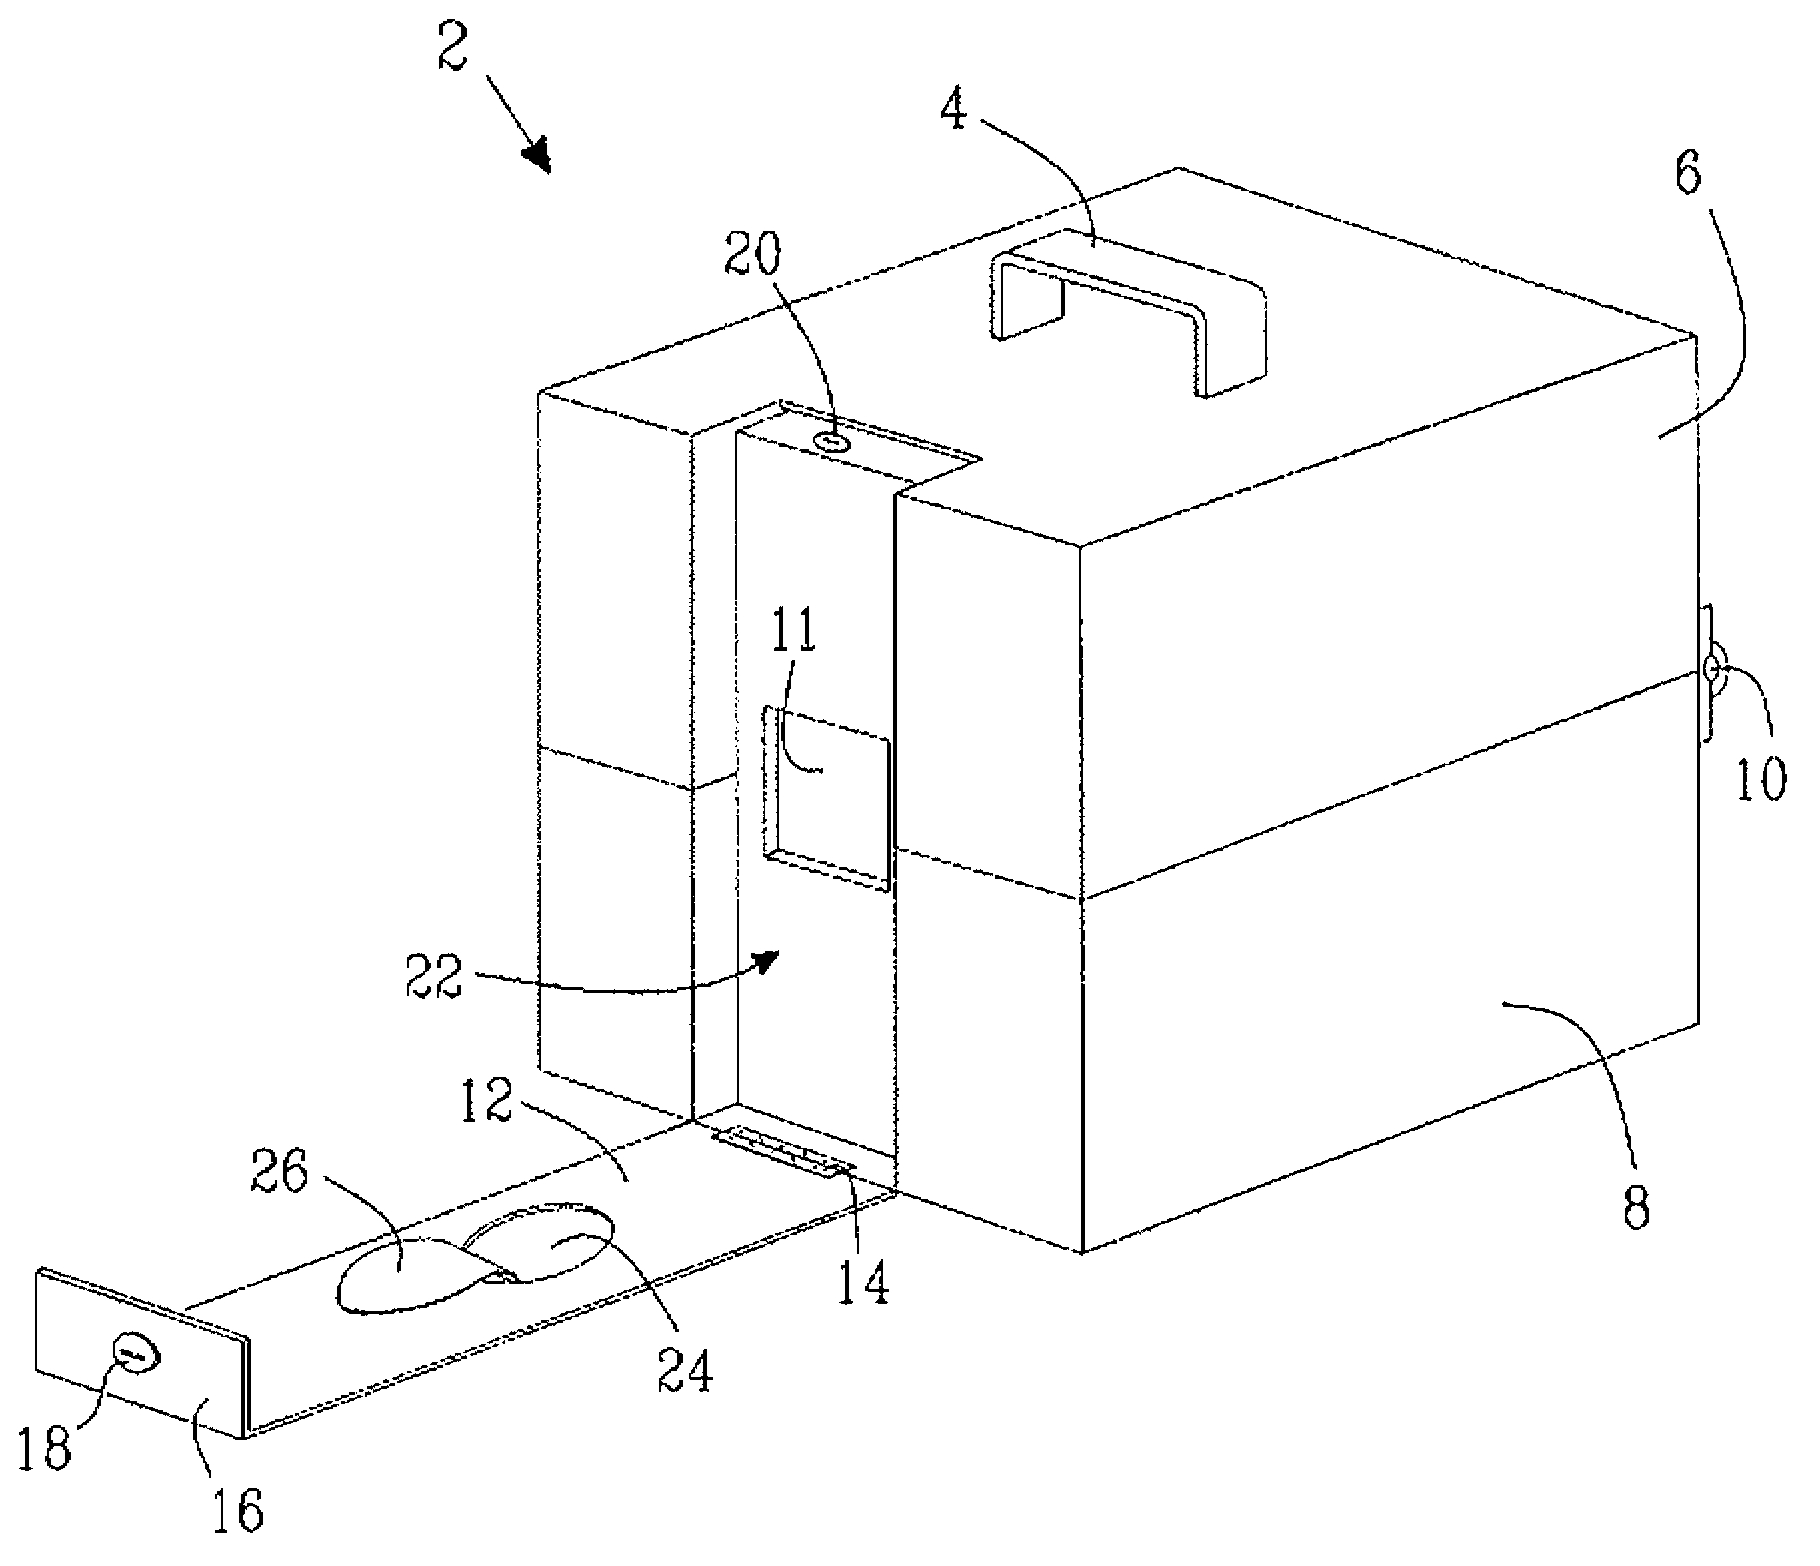 A dispenser for absorbent paper tissue or nonwoven material